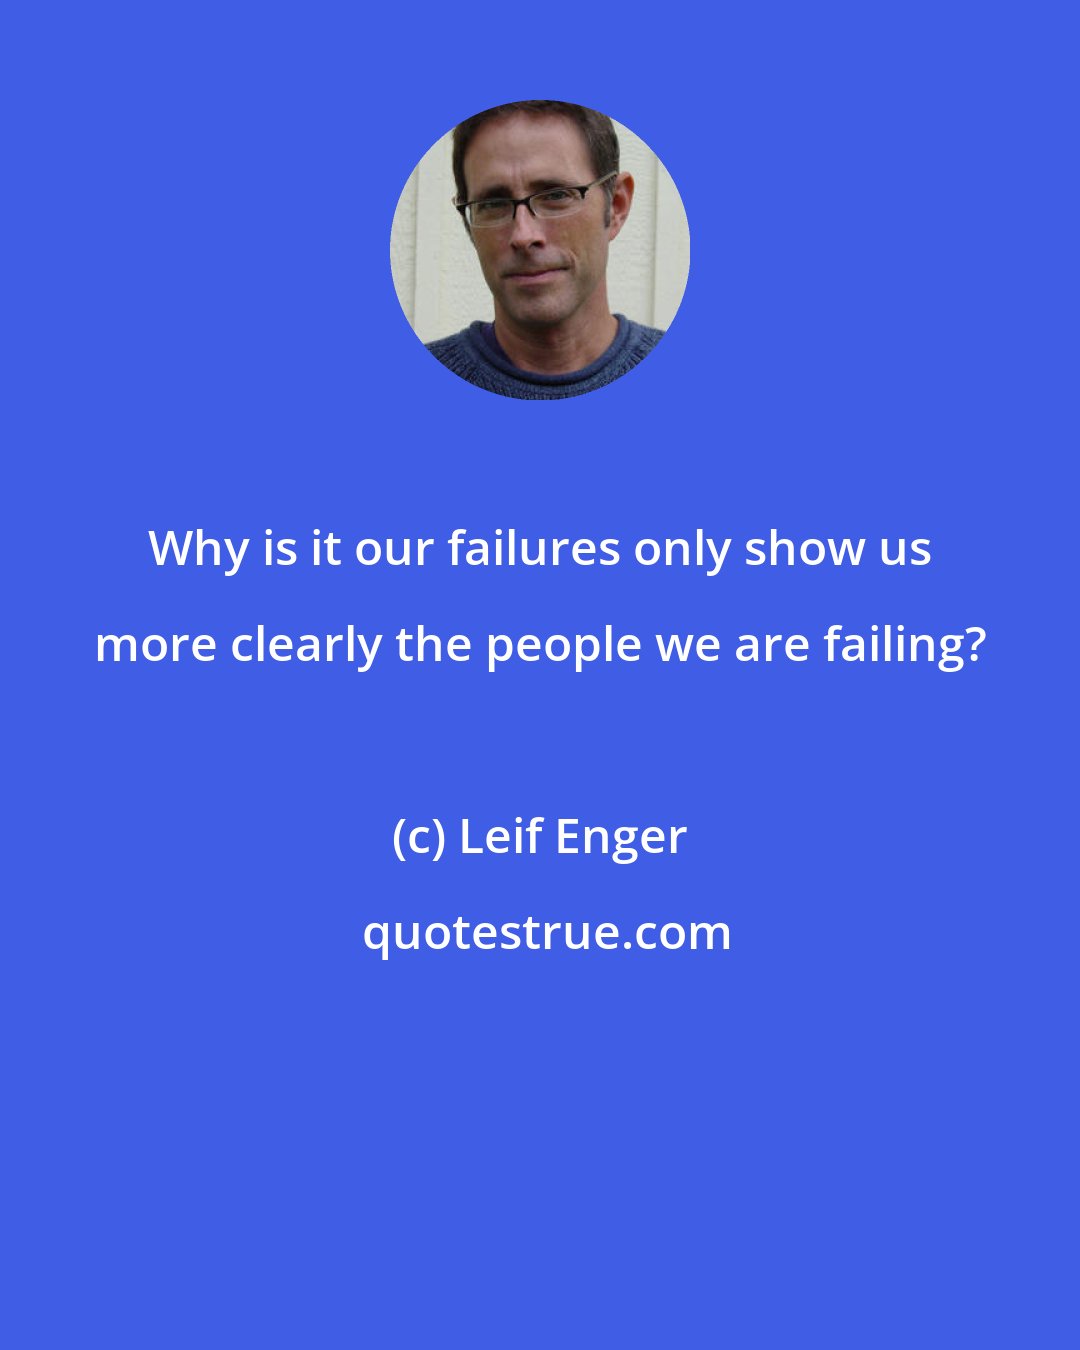 Leif Enger: Why is it our failures only show us more clearly the people we are failing?